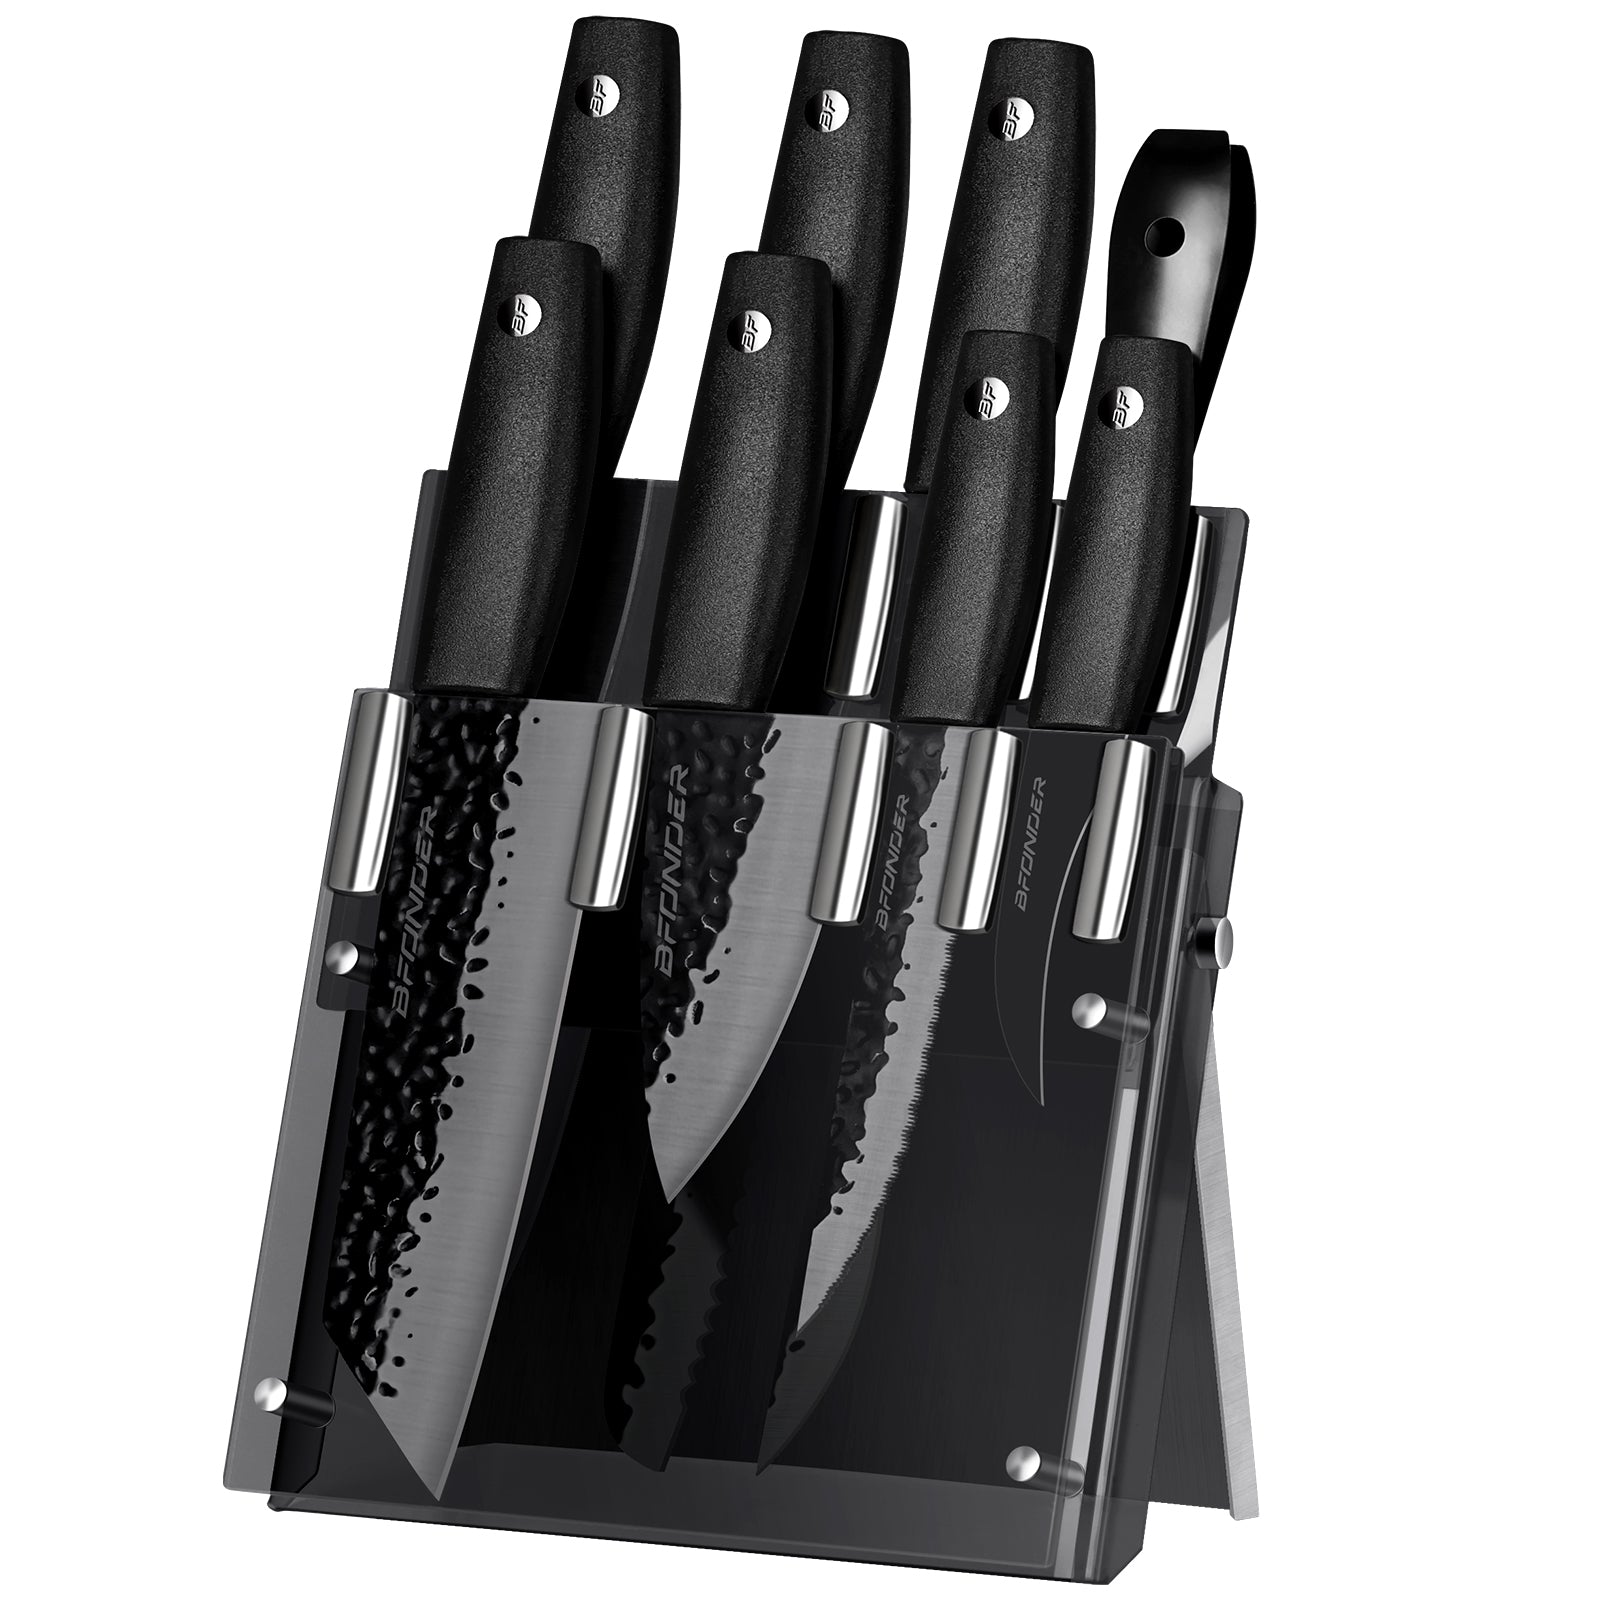  Bfonder Kitchen Knife Set with Wooden Box, 4PCS Professional  Chef Knife Set for Bread Garnishing, High Carbon Stainless Steel Japanese  Knife Sets with Ultra Sharp Blade & Ergonomic Handle, Gift Box